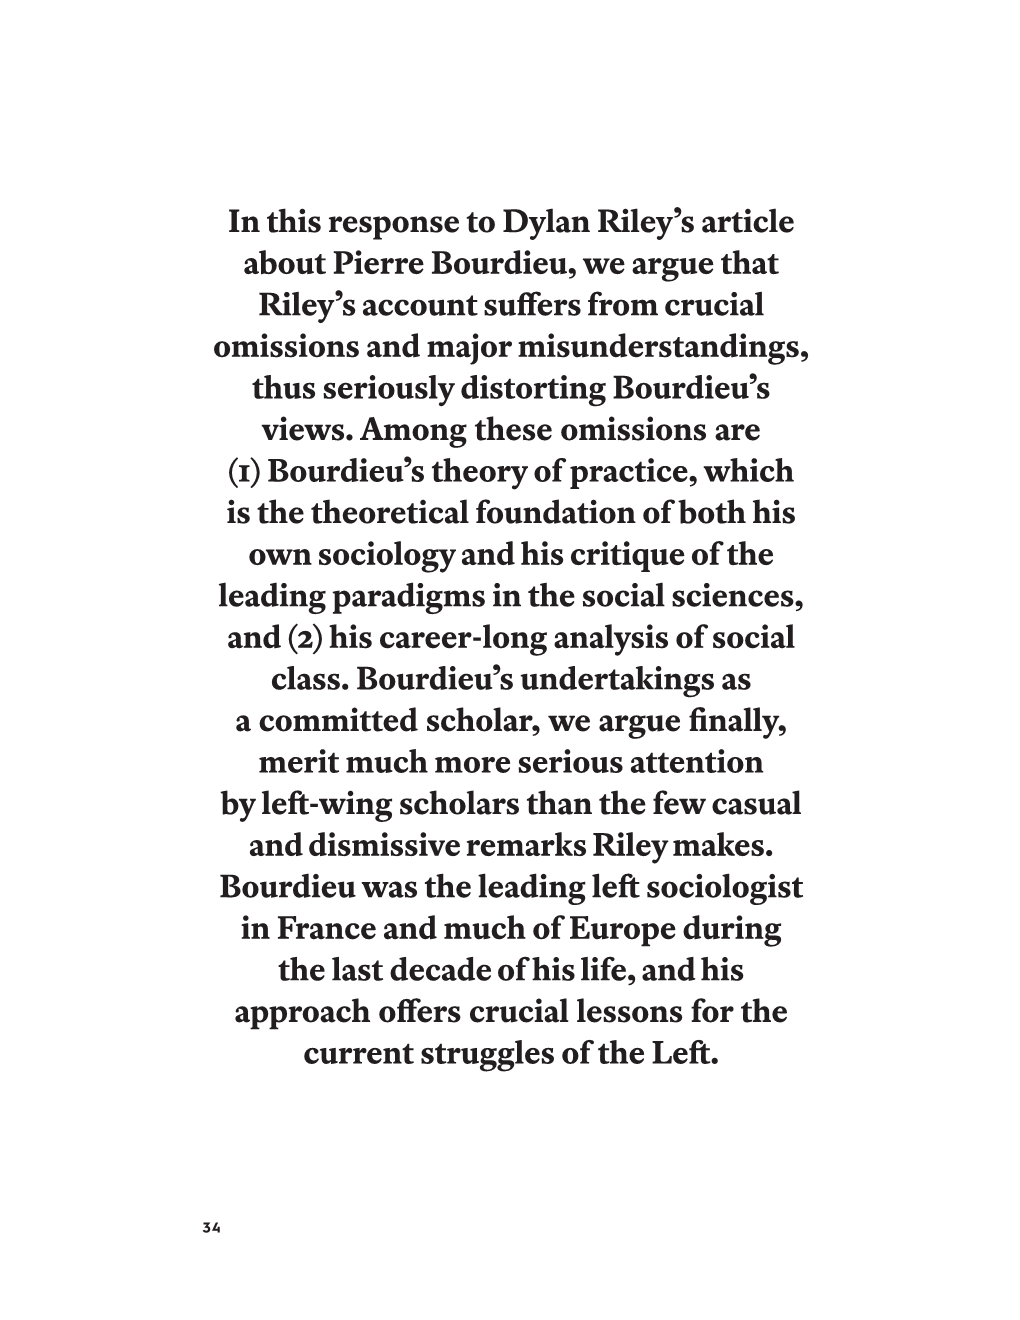 In This Response to Dylan Riley's Article About Pierre Bourdieu, We Argue That Riley's Account Suffers from Crucial Omission